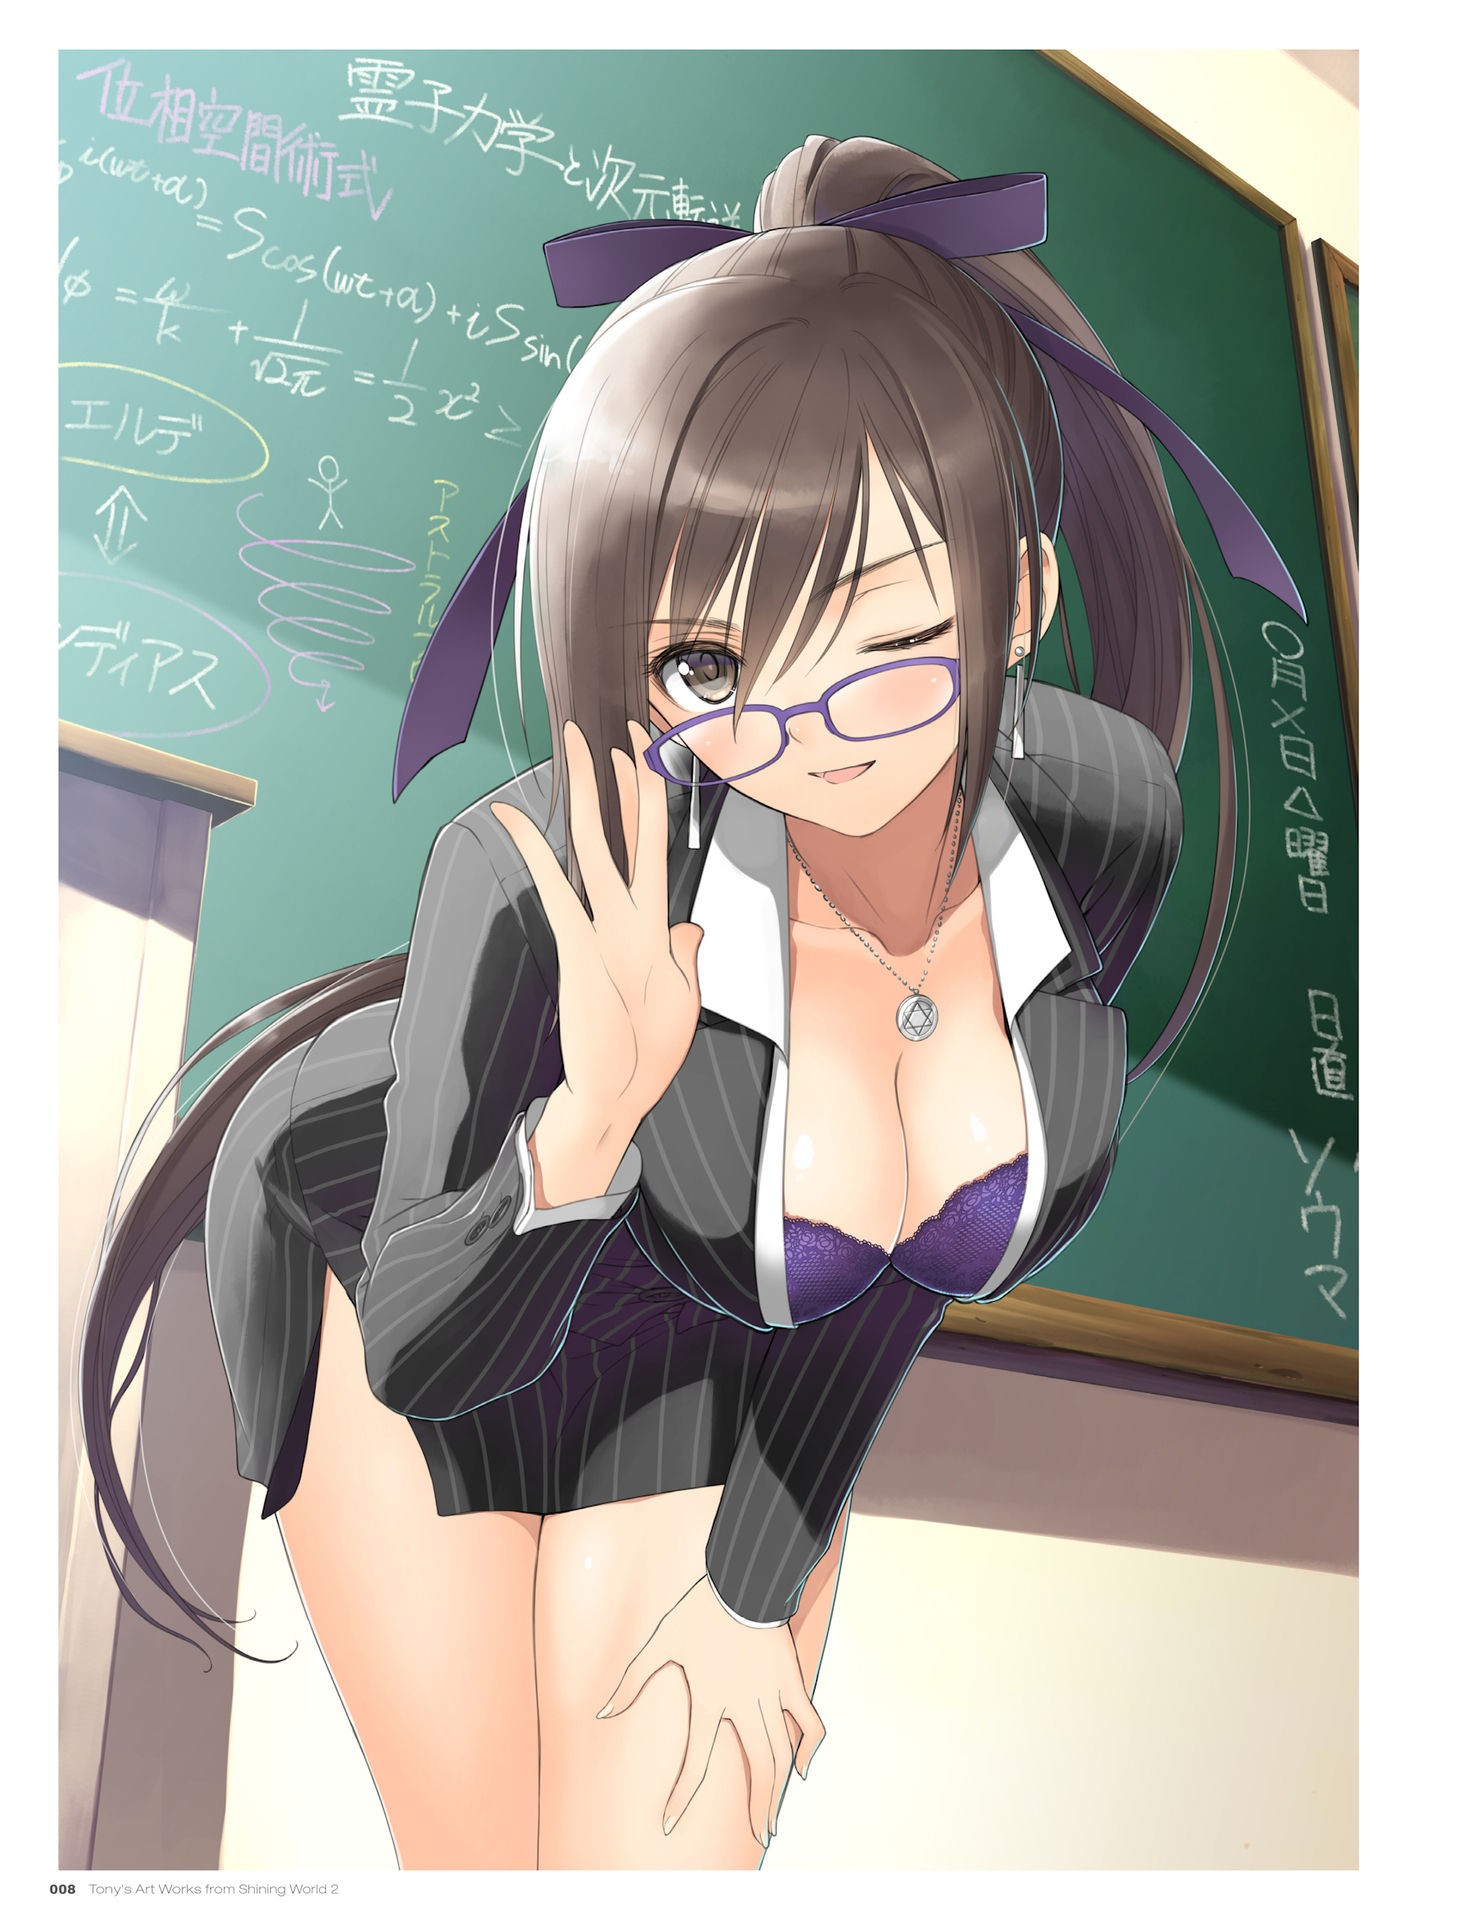 Anime 1461x1920 anime anime girls bra business suit cleavage open shirt glasses long hair Tony Taka artwork teachers classroom ponytail brunette women with glasses chalkboard boobs big boobs one eye closed looking at viewer women curvy